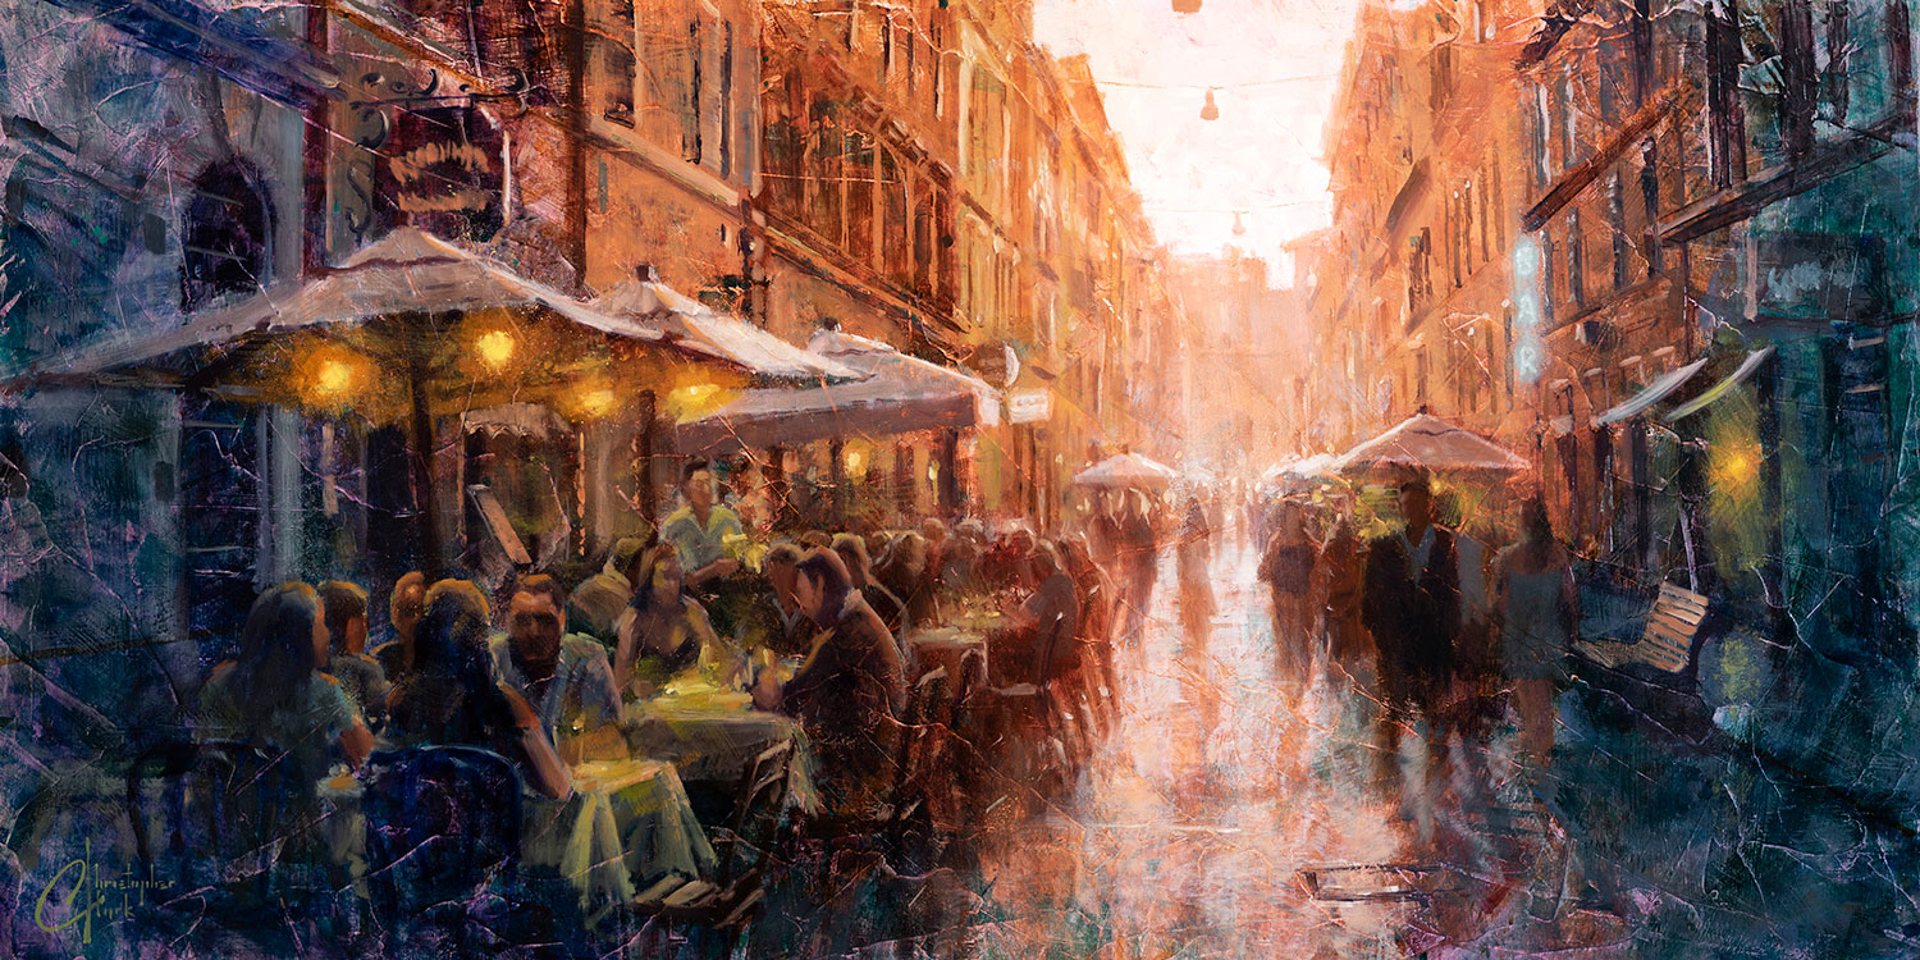 Outdoor Cafes in Rome, Italy by Christopher Clark